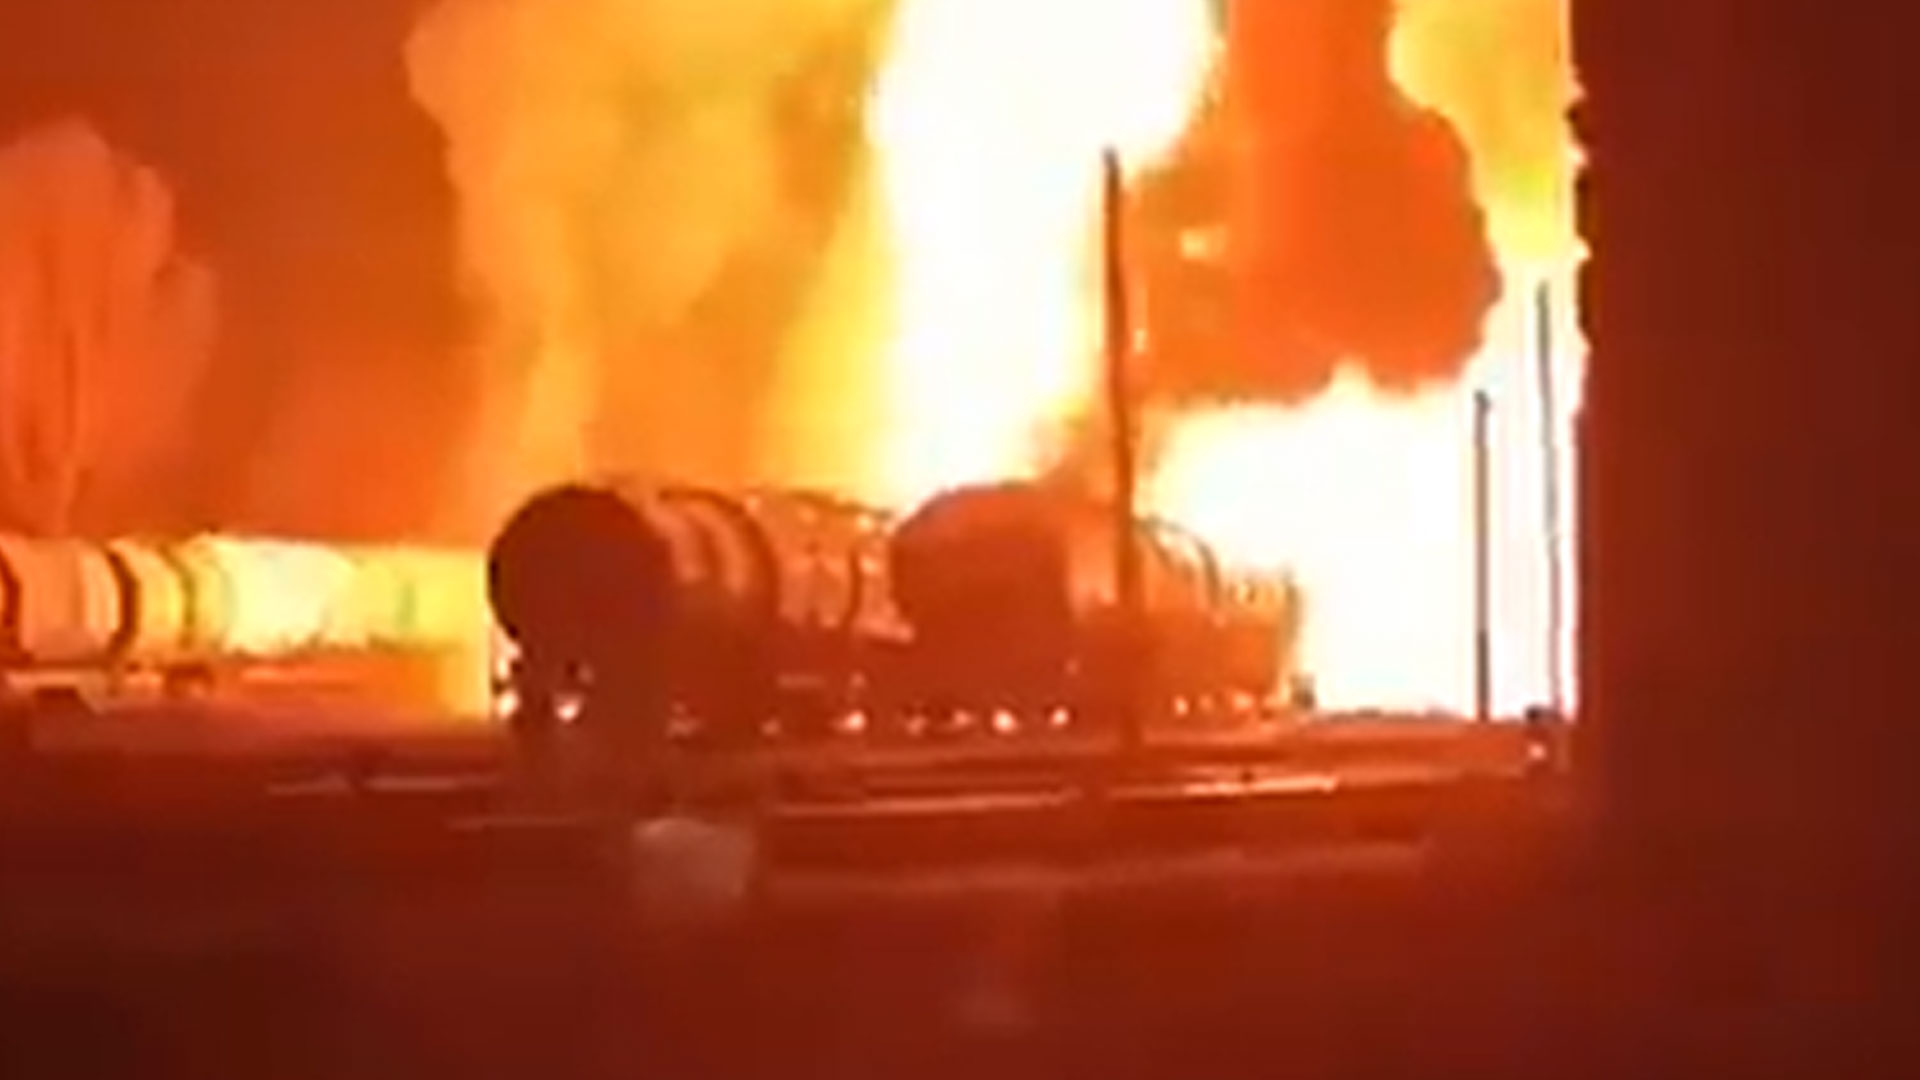 Explosion triggers huge inferno at train station in Russia-occupied Donetsk as shells blast fuel tankers